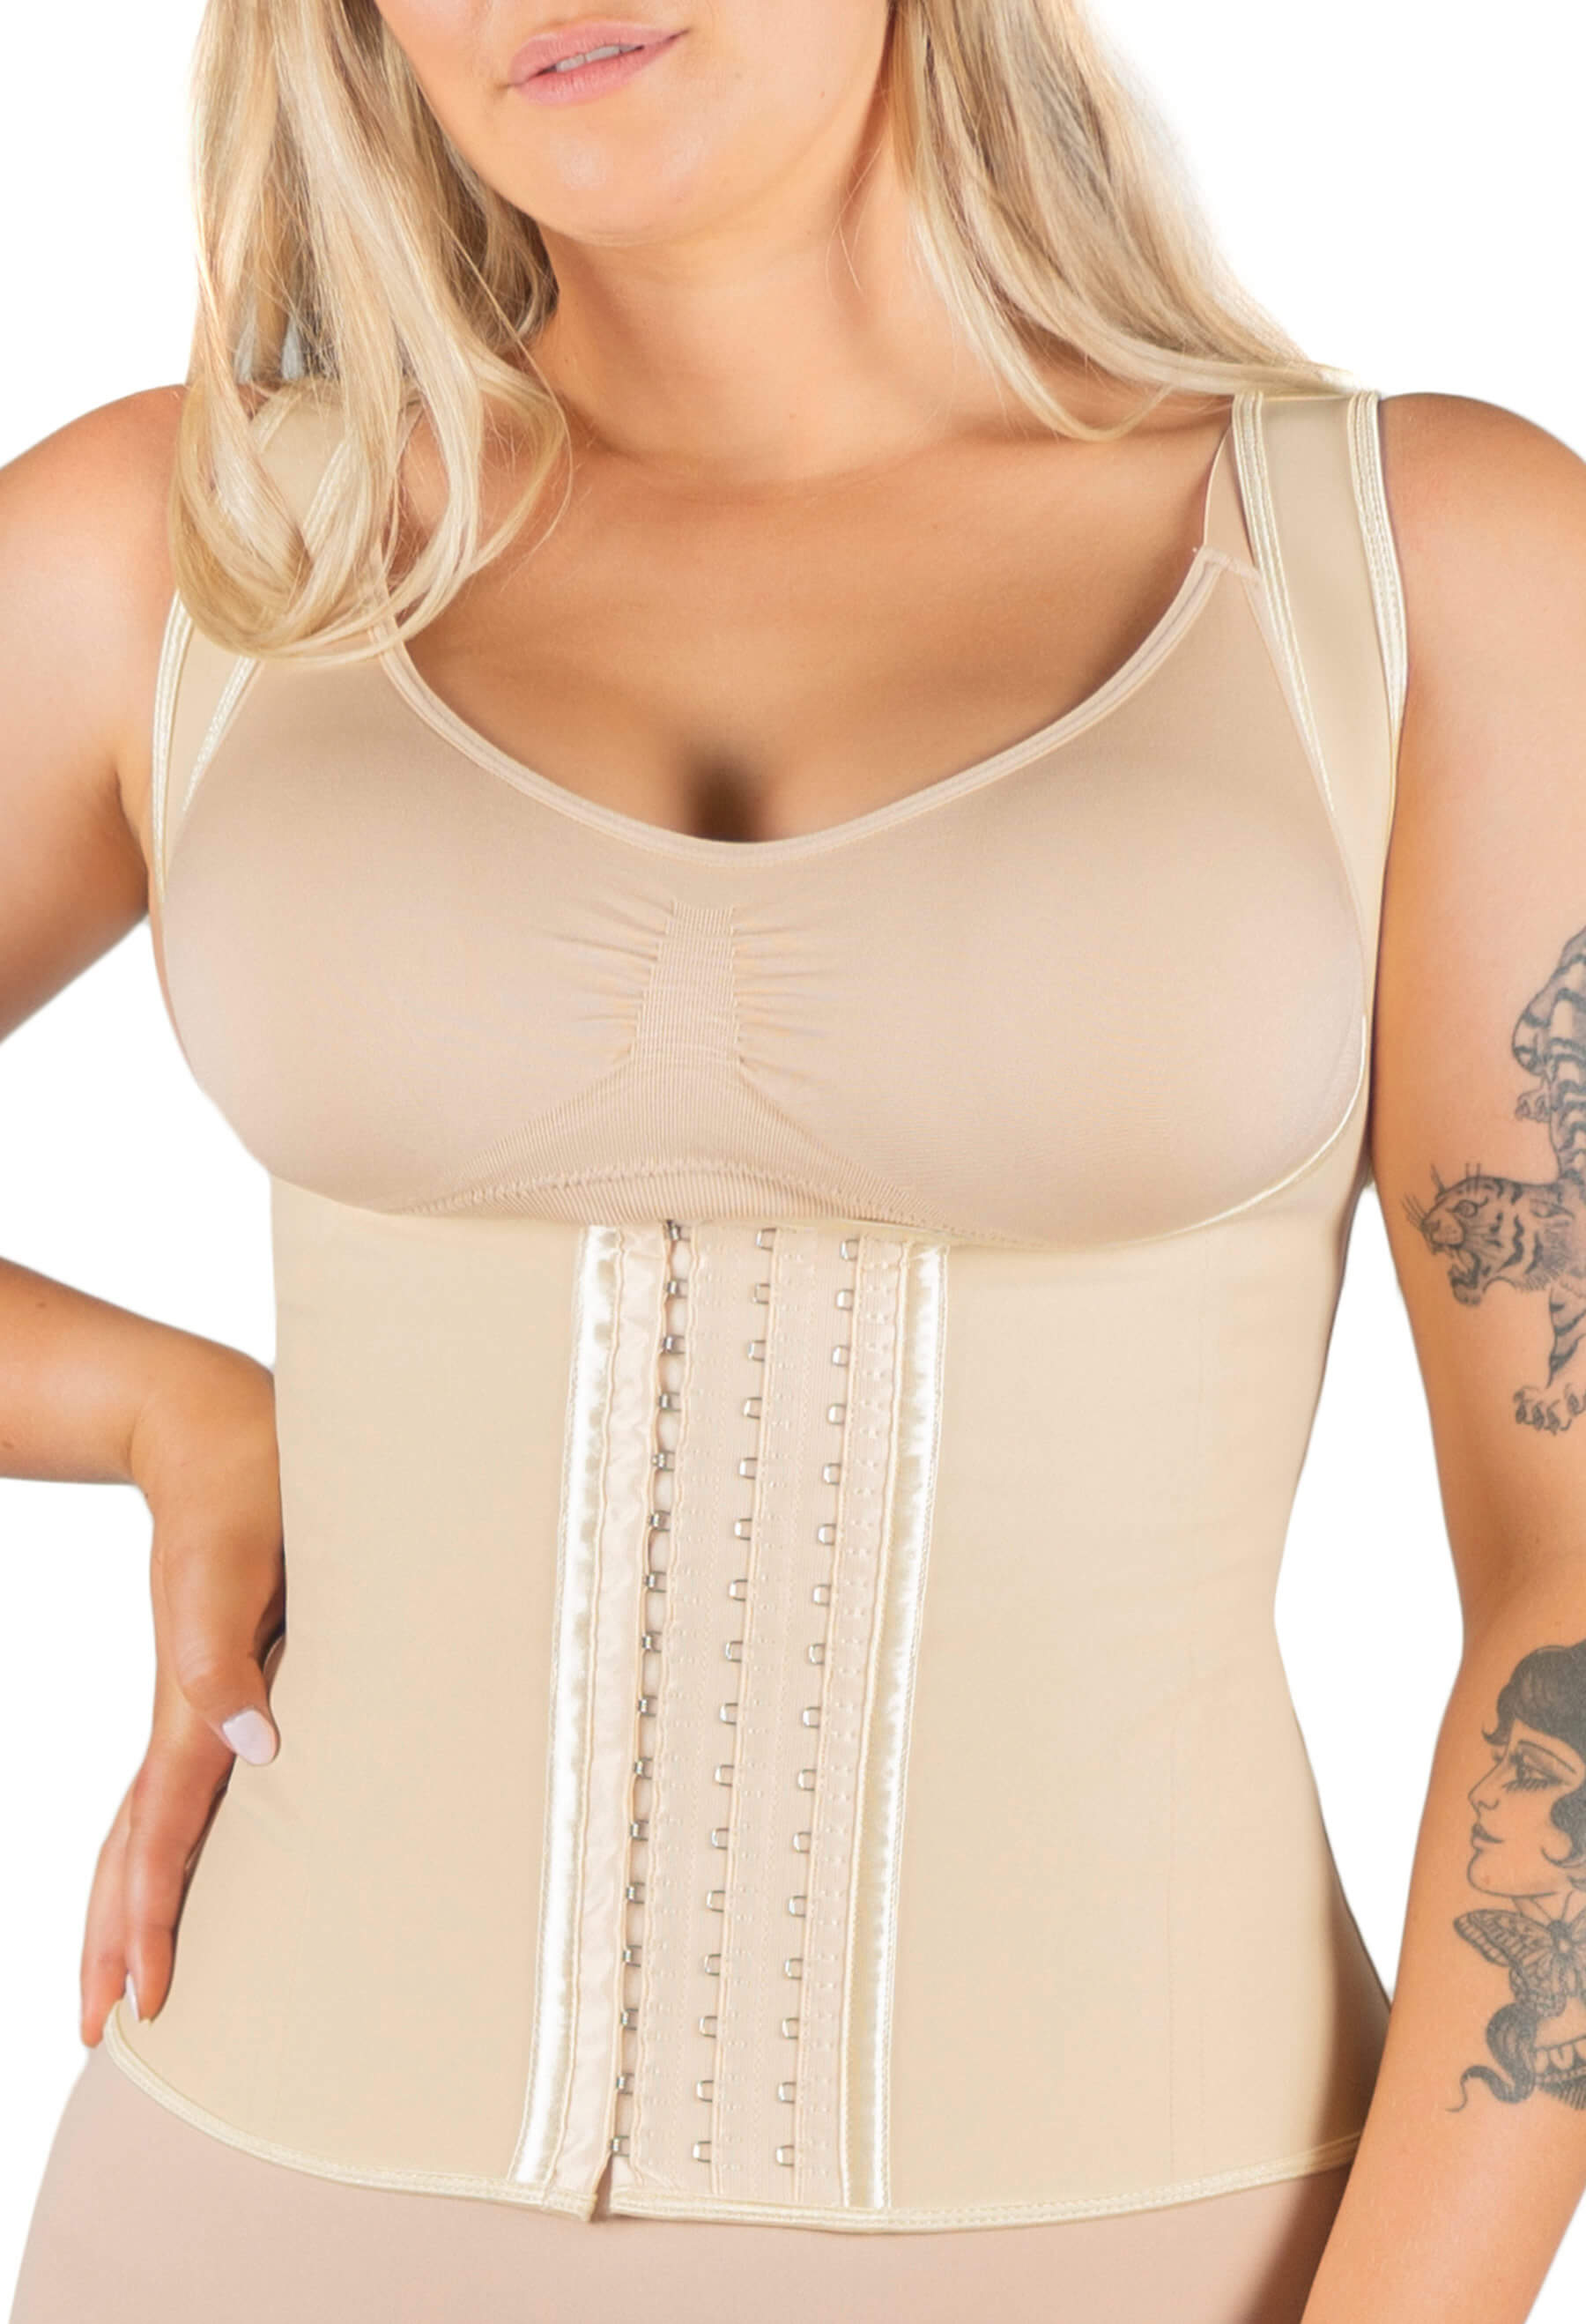 Is Shapewear The Same As A Waist Trainer?